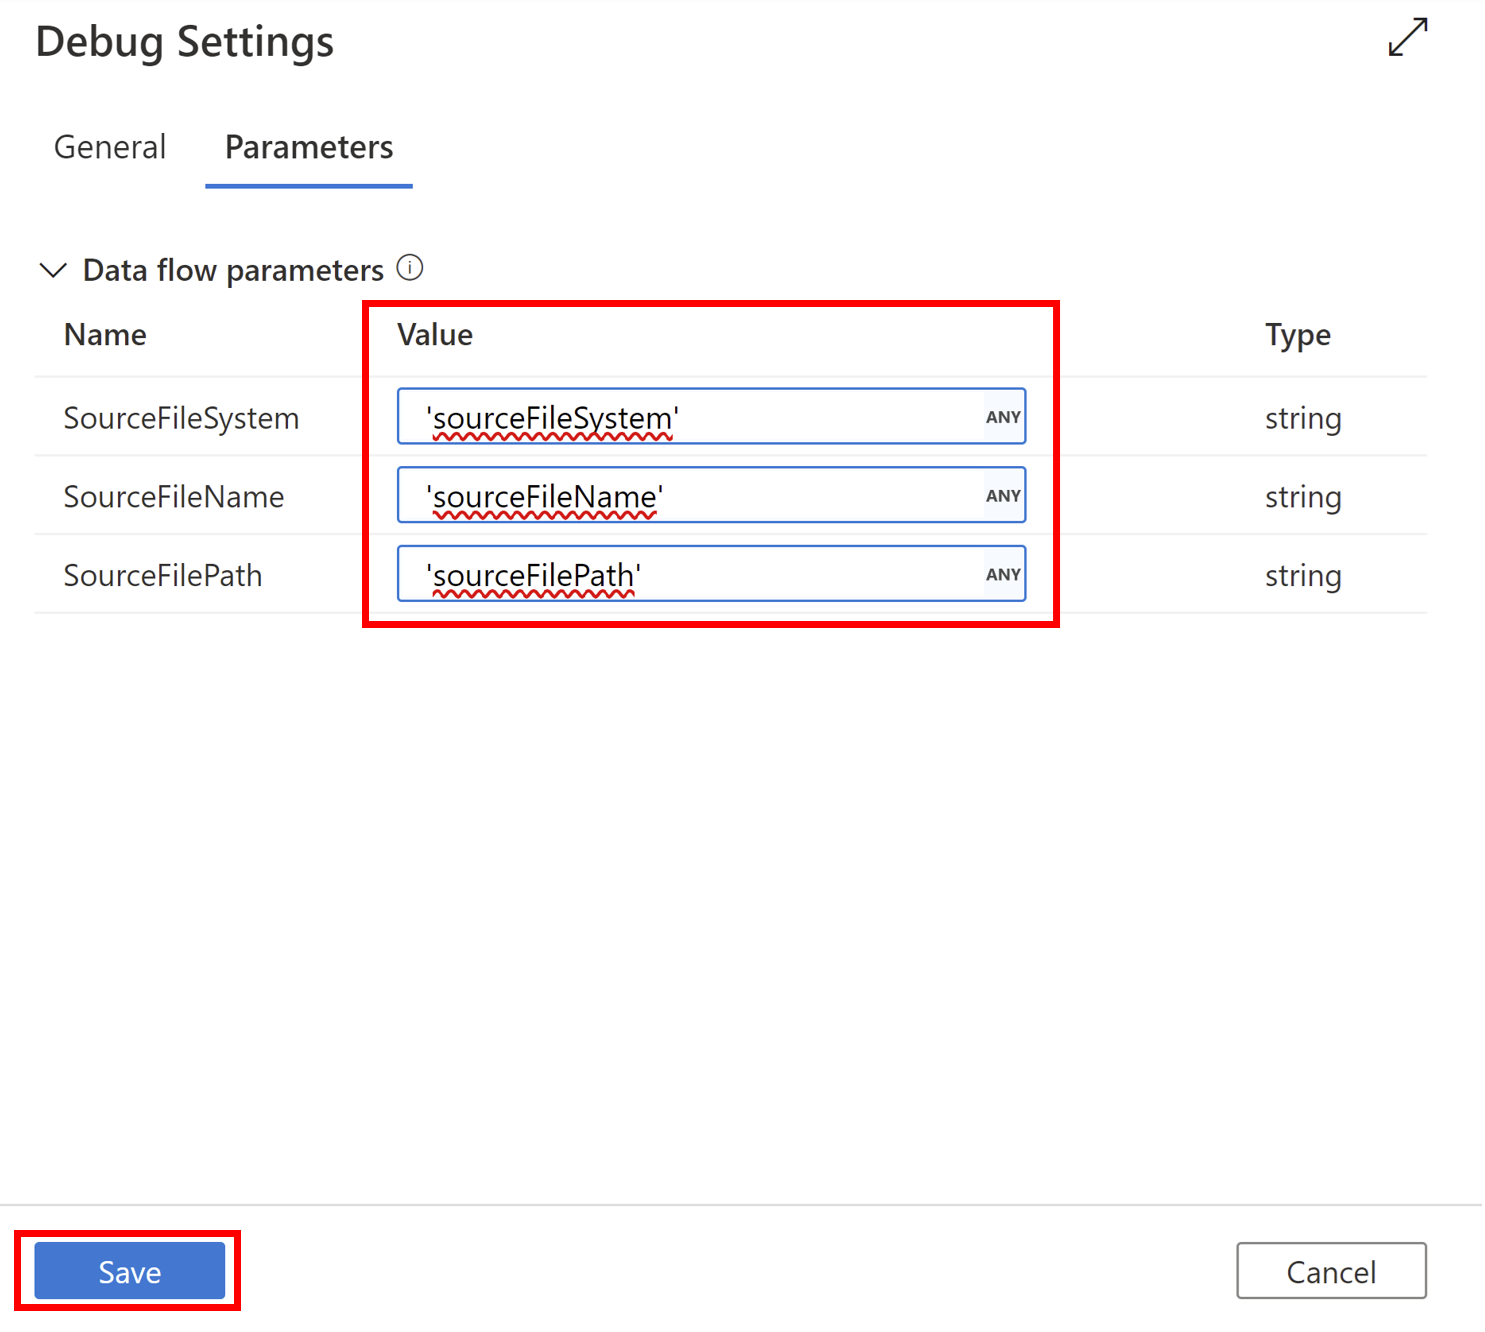 Screenshot of where to update parameters in Debug settings in a panel on the right side of the screen.